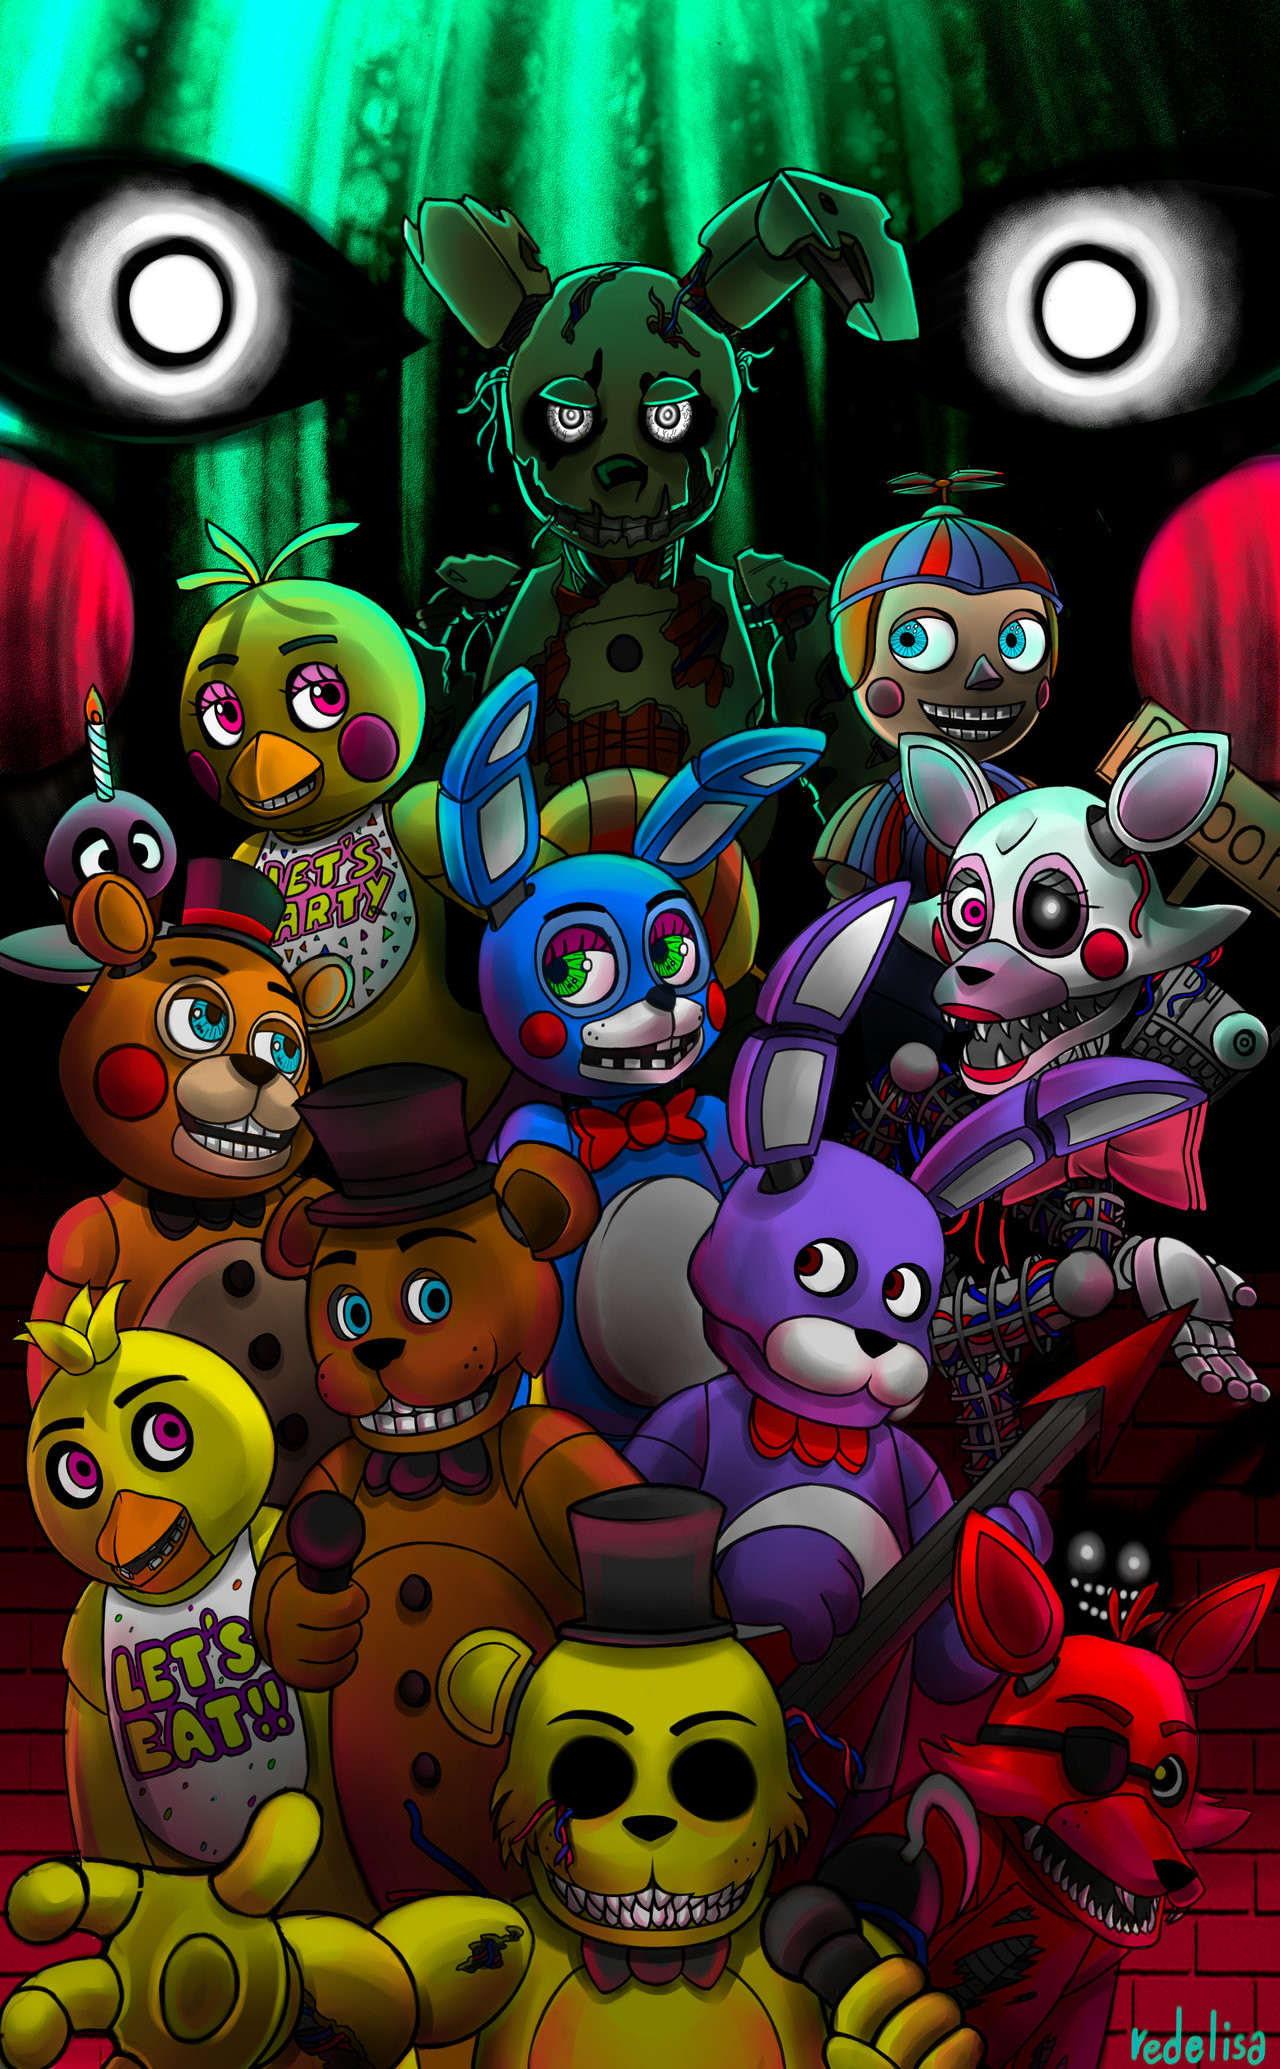 Five Nights At Freddys Wallpapers Pictures